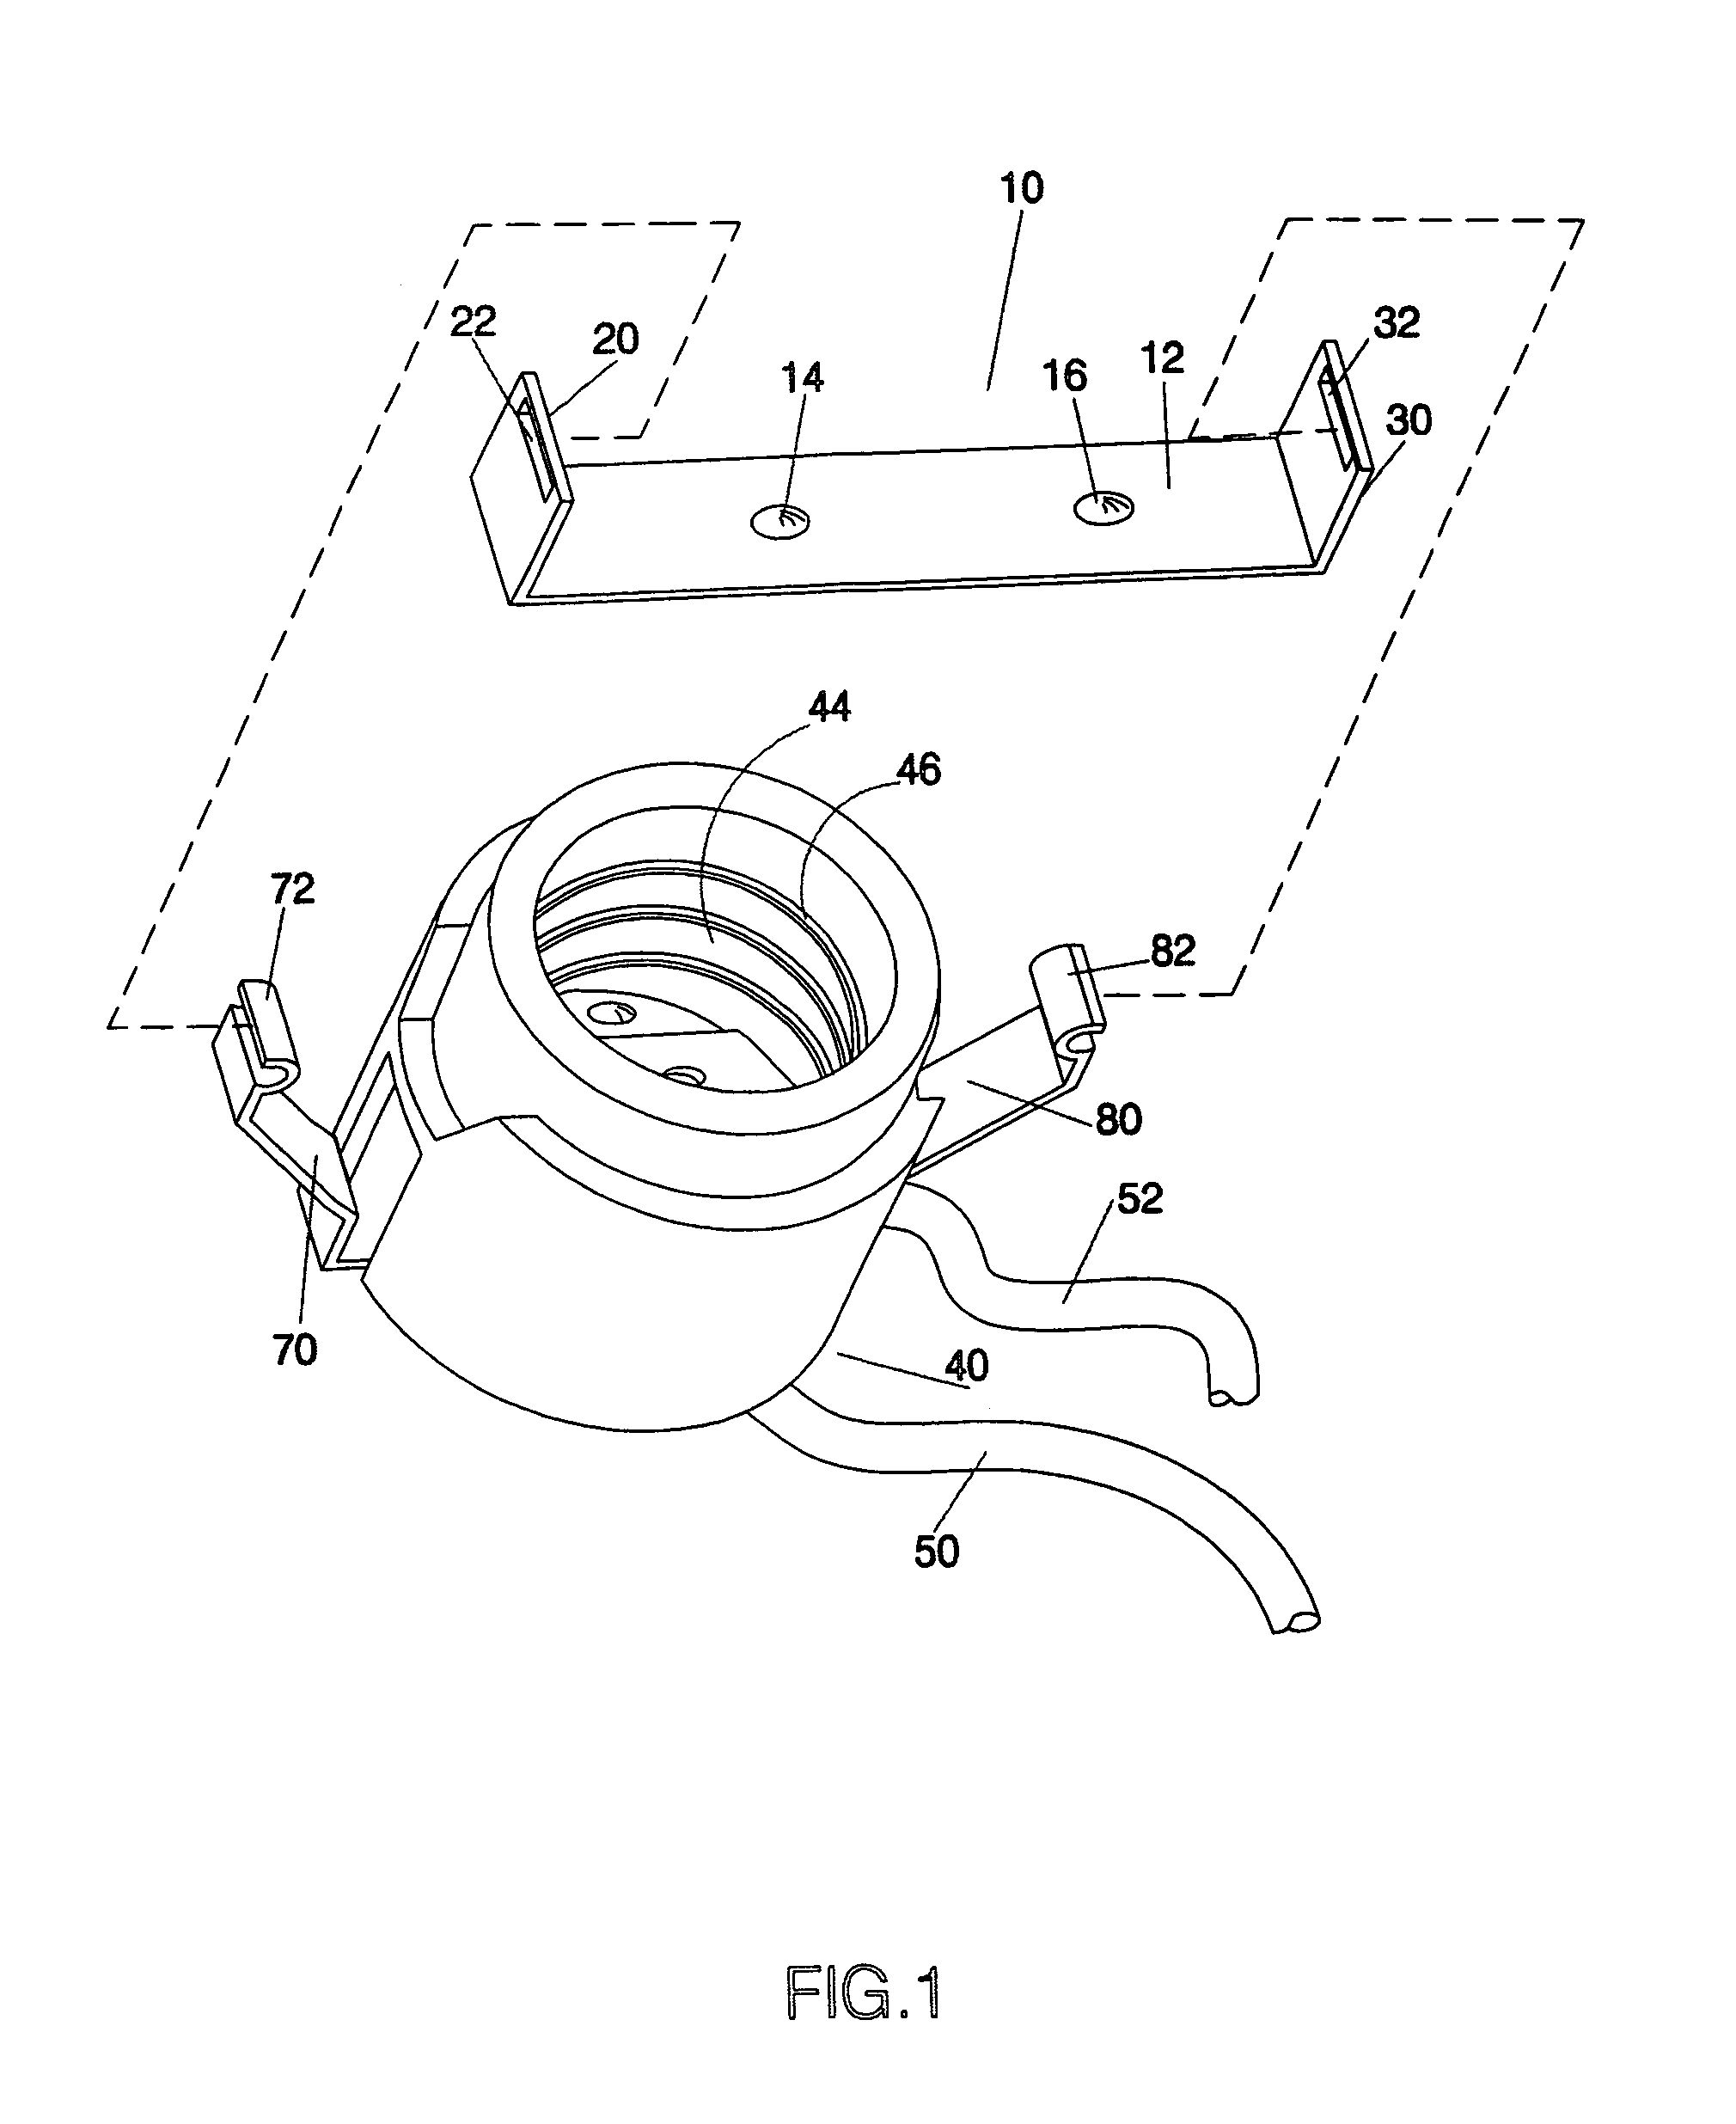 Apparatus to safely retain a lightbulb socket assembly in a ceiling fixture during shipping and rapidly converting the socket assembly for use during installation